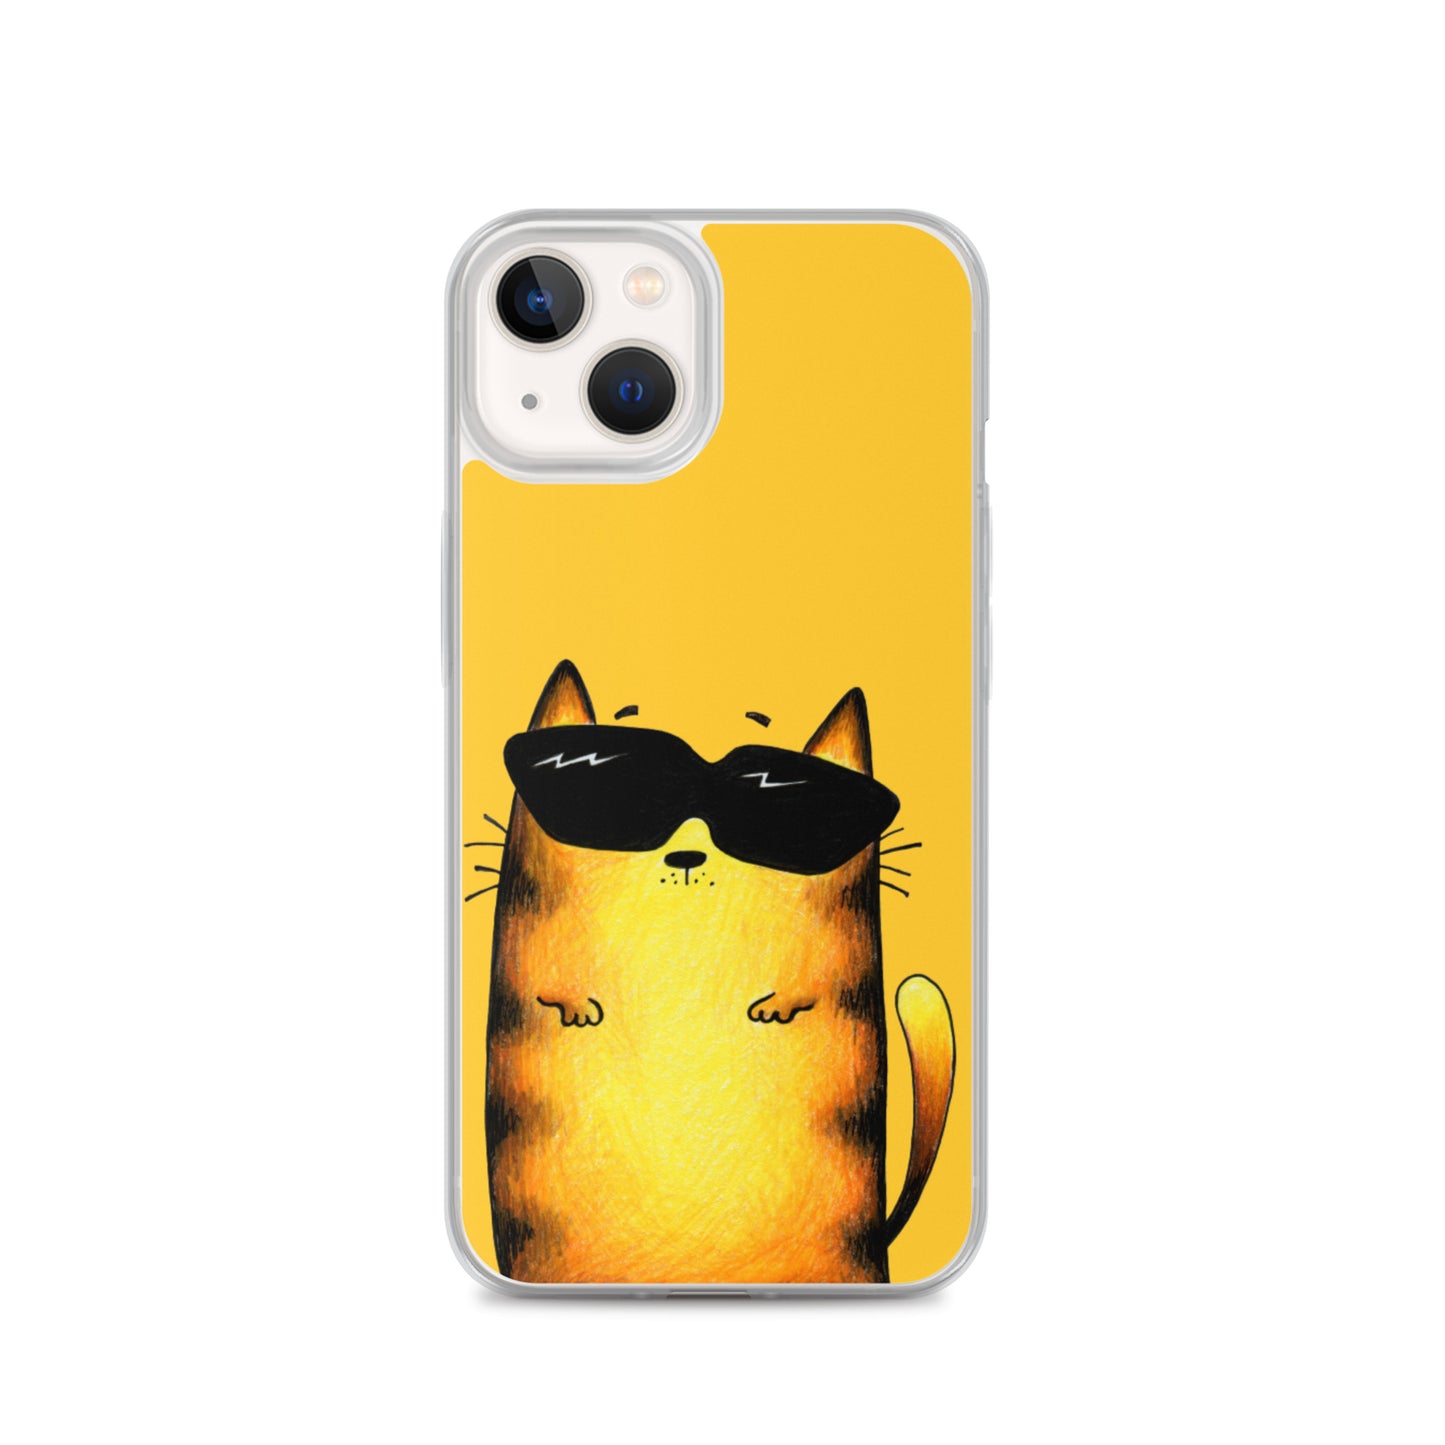 flexible yellow iphone 13 pro case with cat print